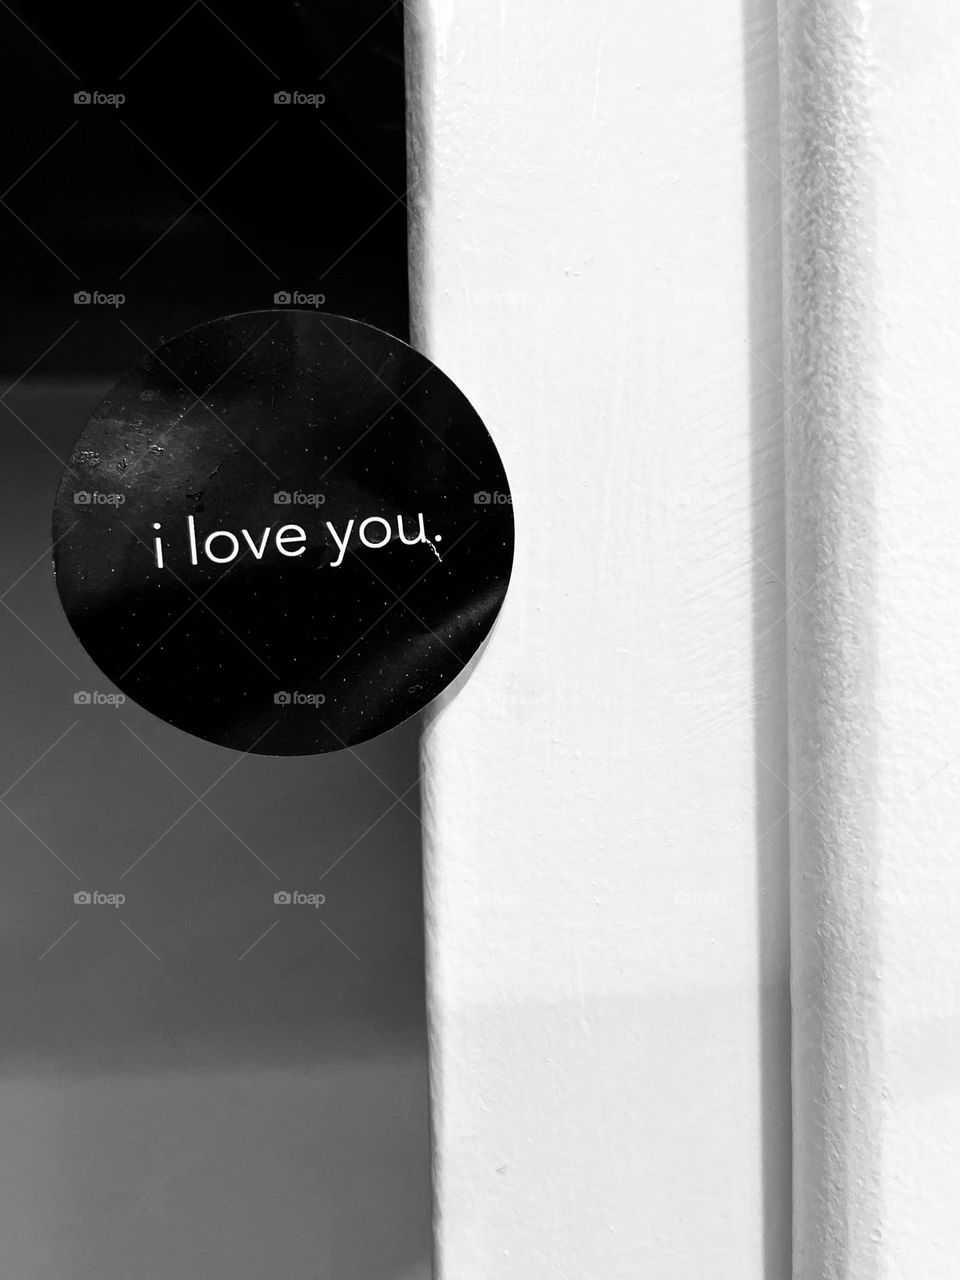 Black and white sticker, I love you, stickers with positive messages, black and white sticker messages, simple things, love messages 